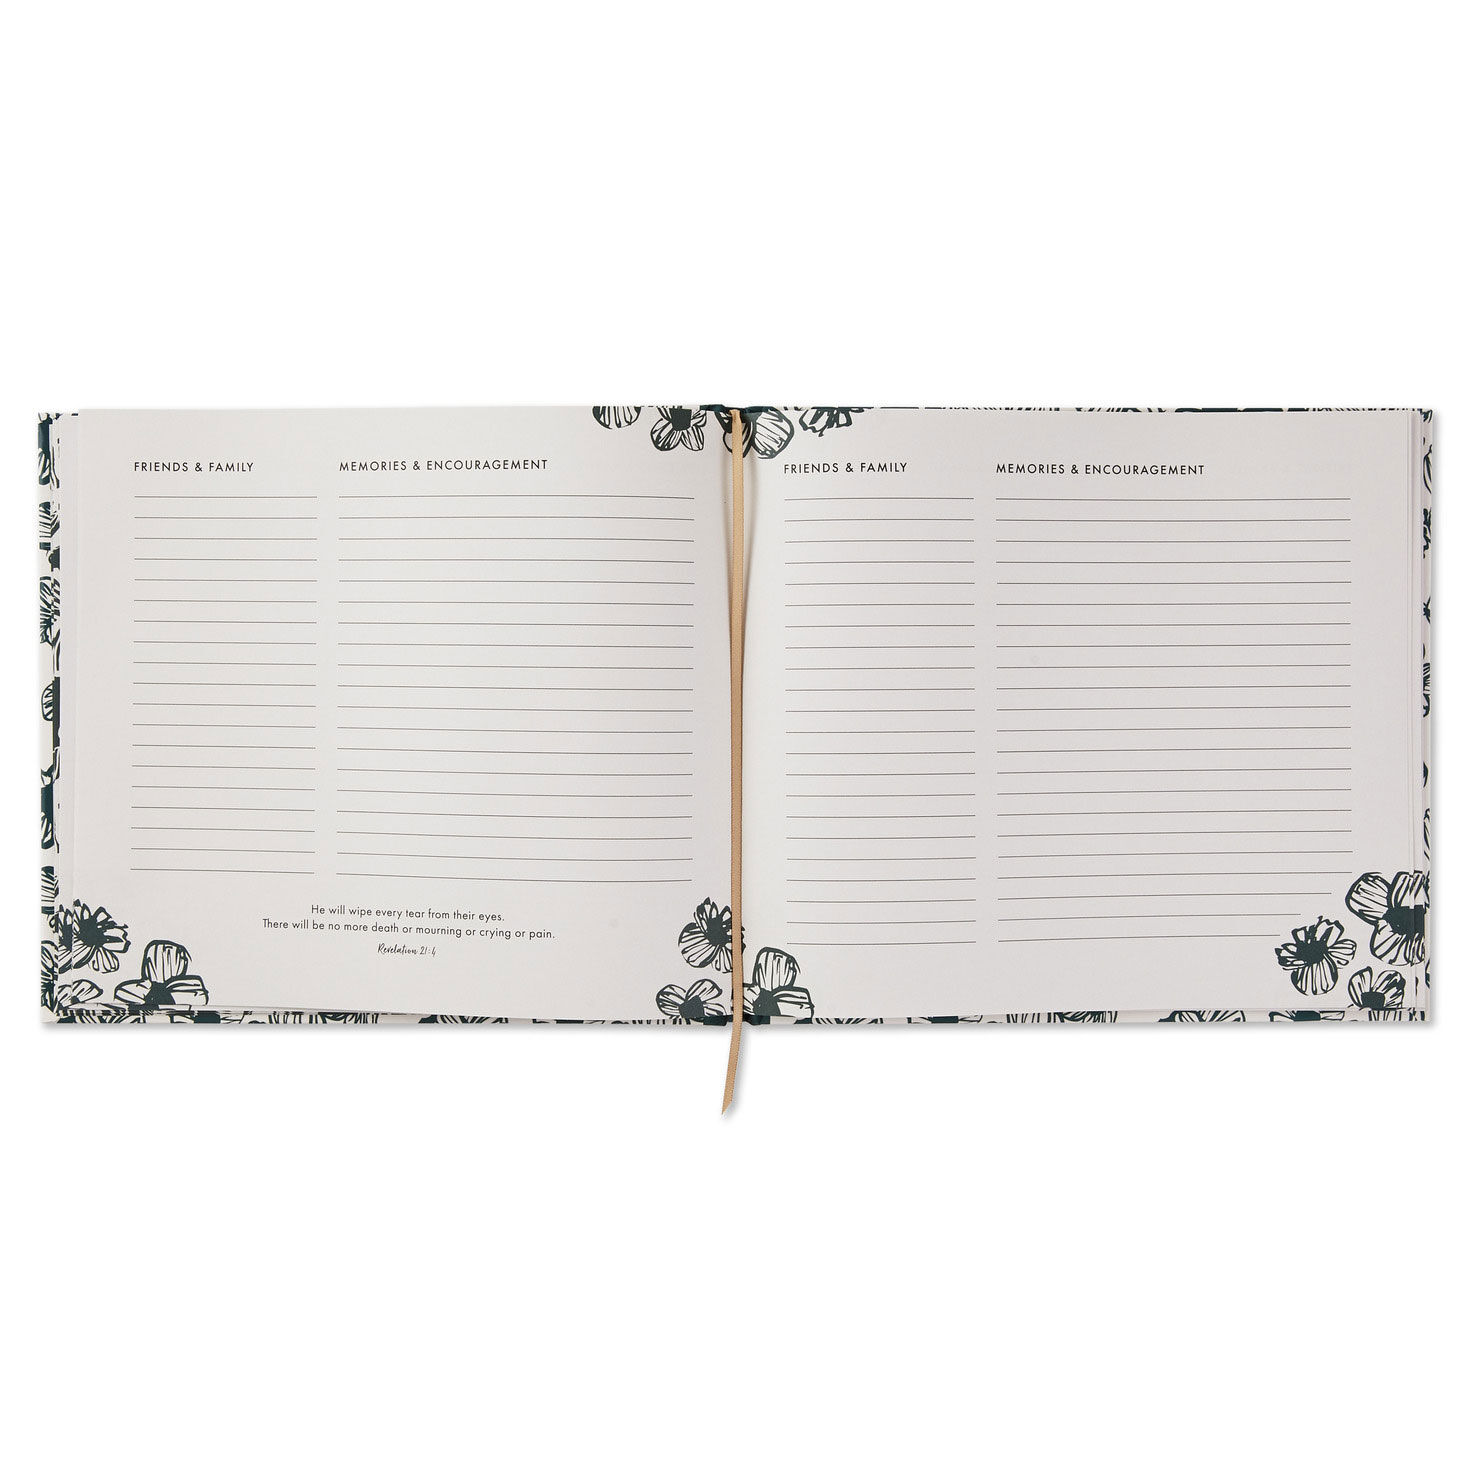 In Loving Memory Floral Funeral Guest Book for only USD 16.99 | Hallmark